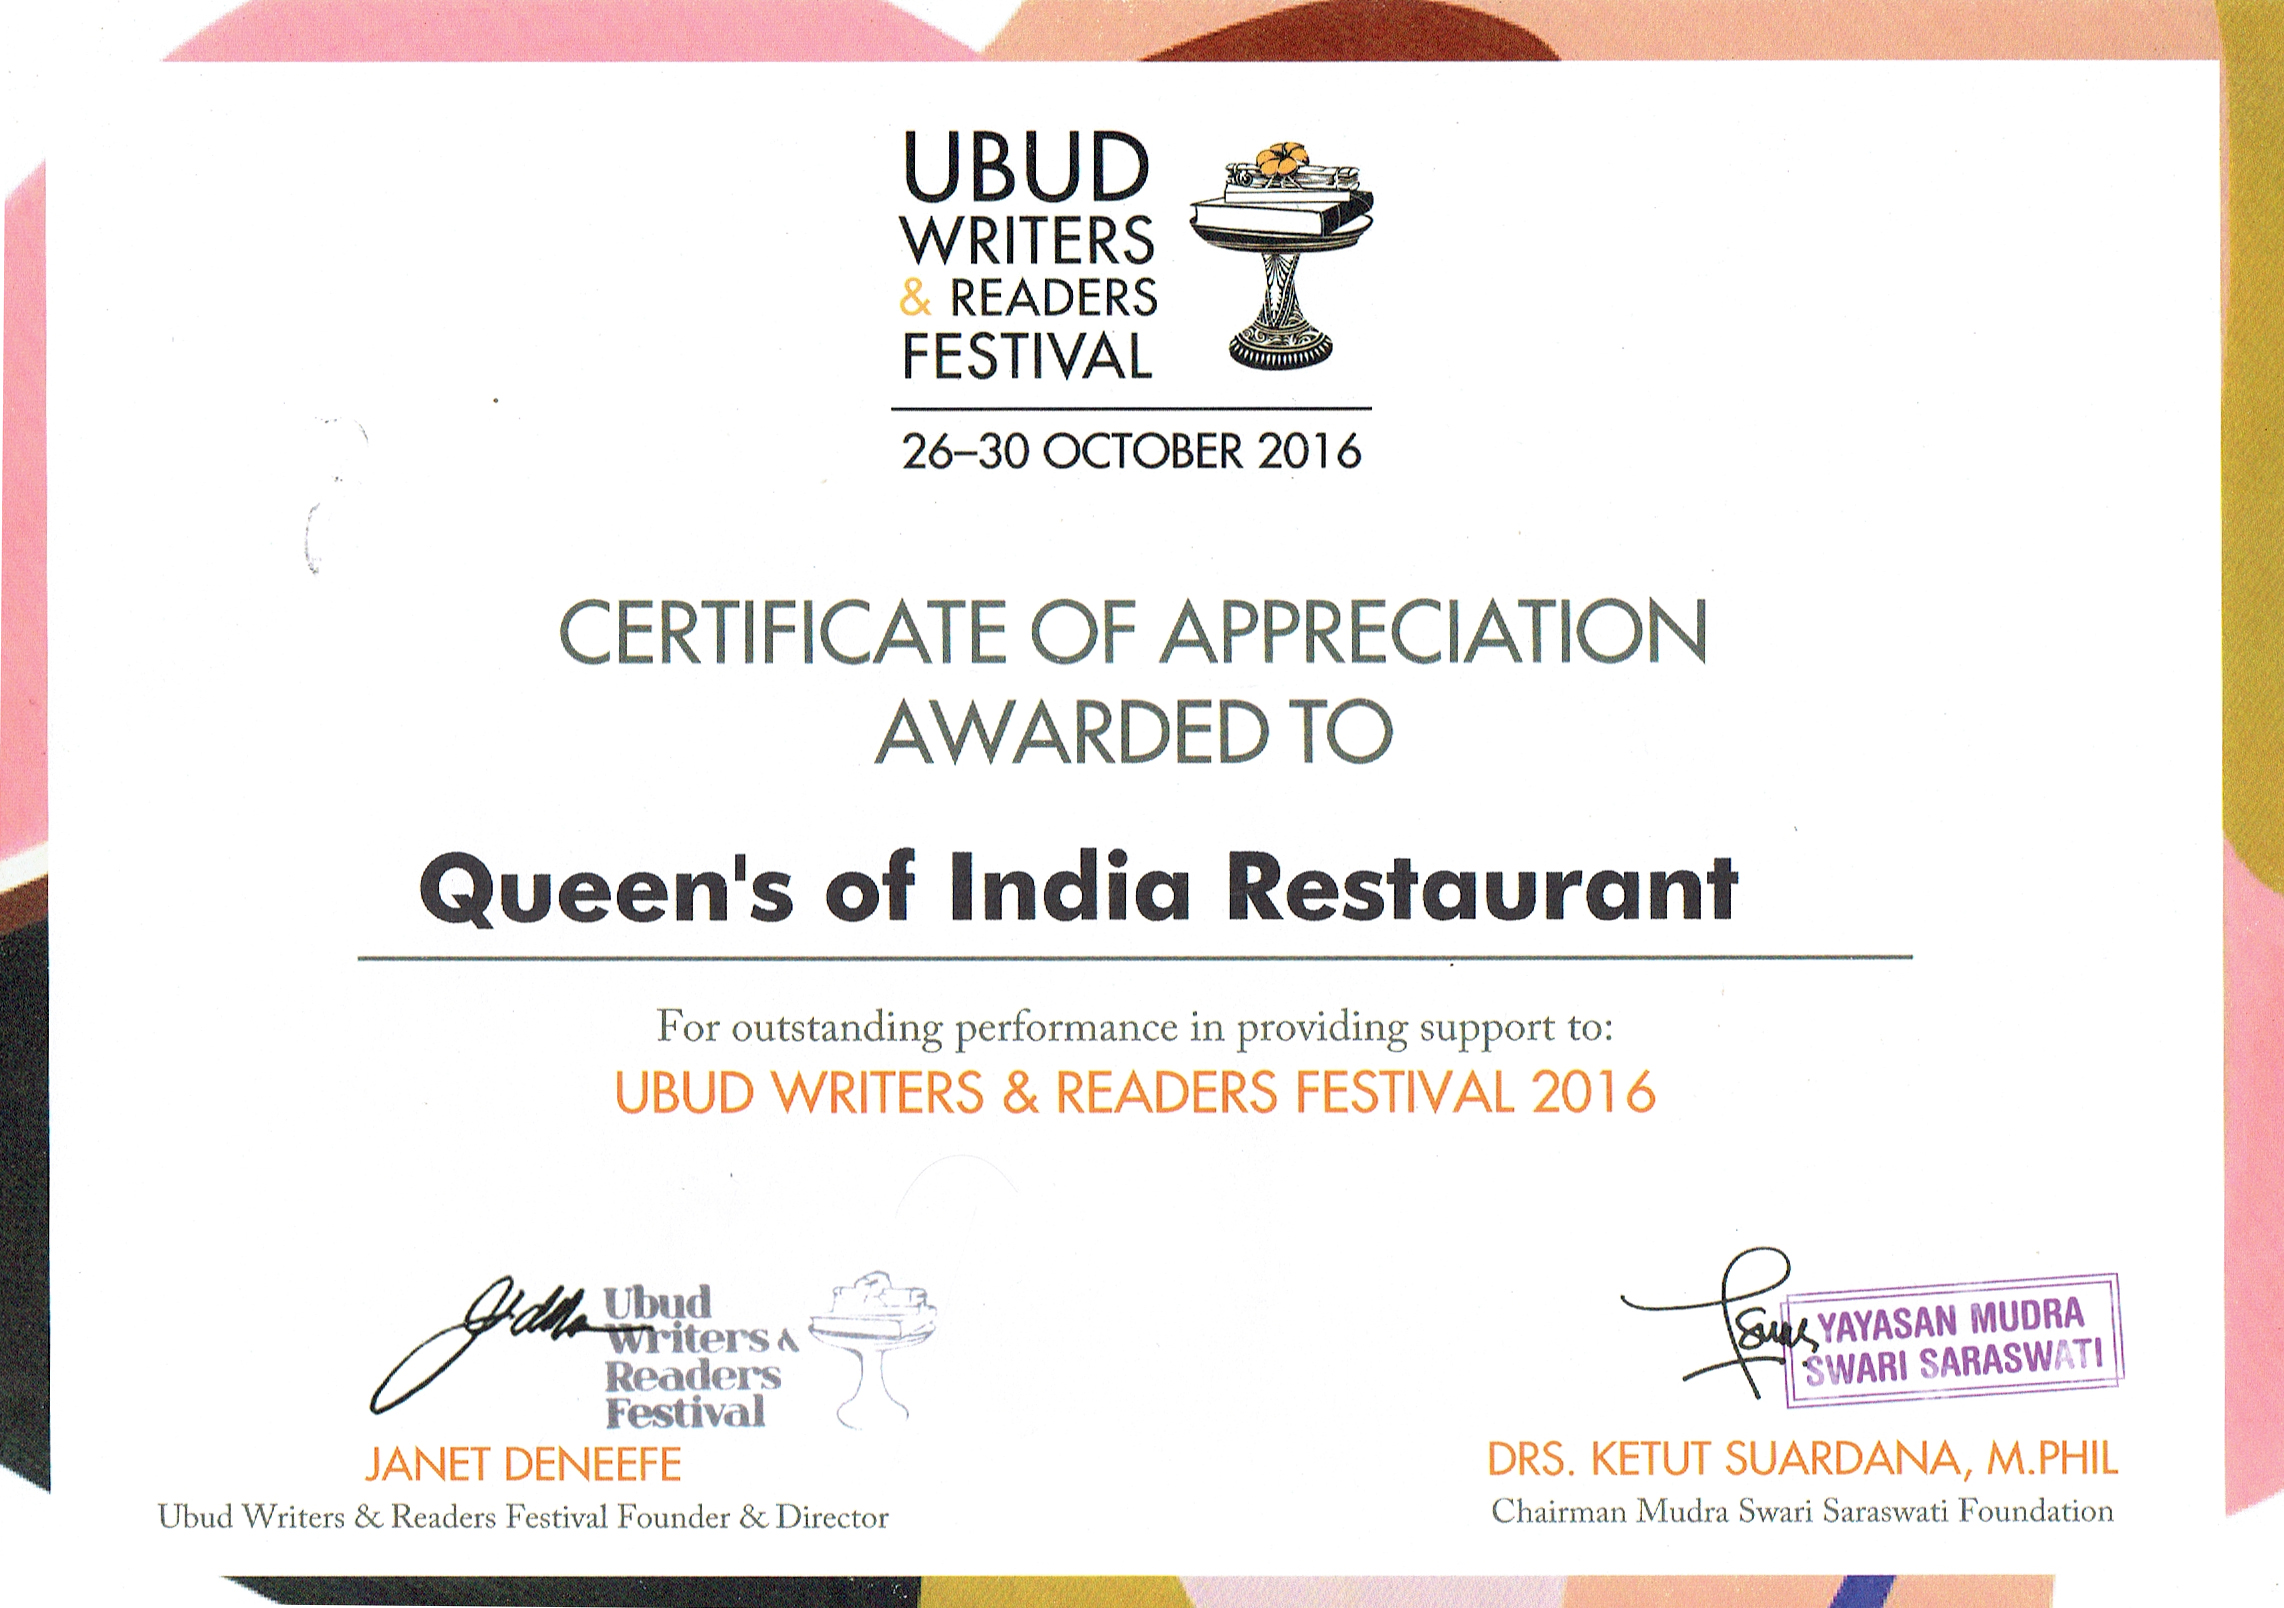 Certificate of Appriciation Awarded to Queens of India